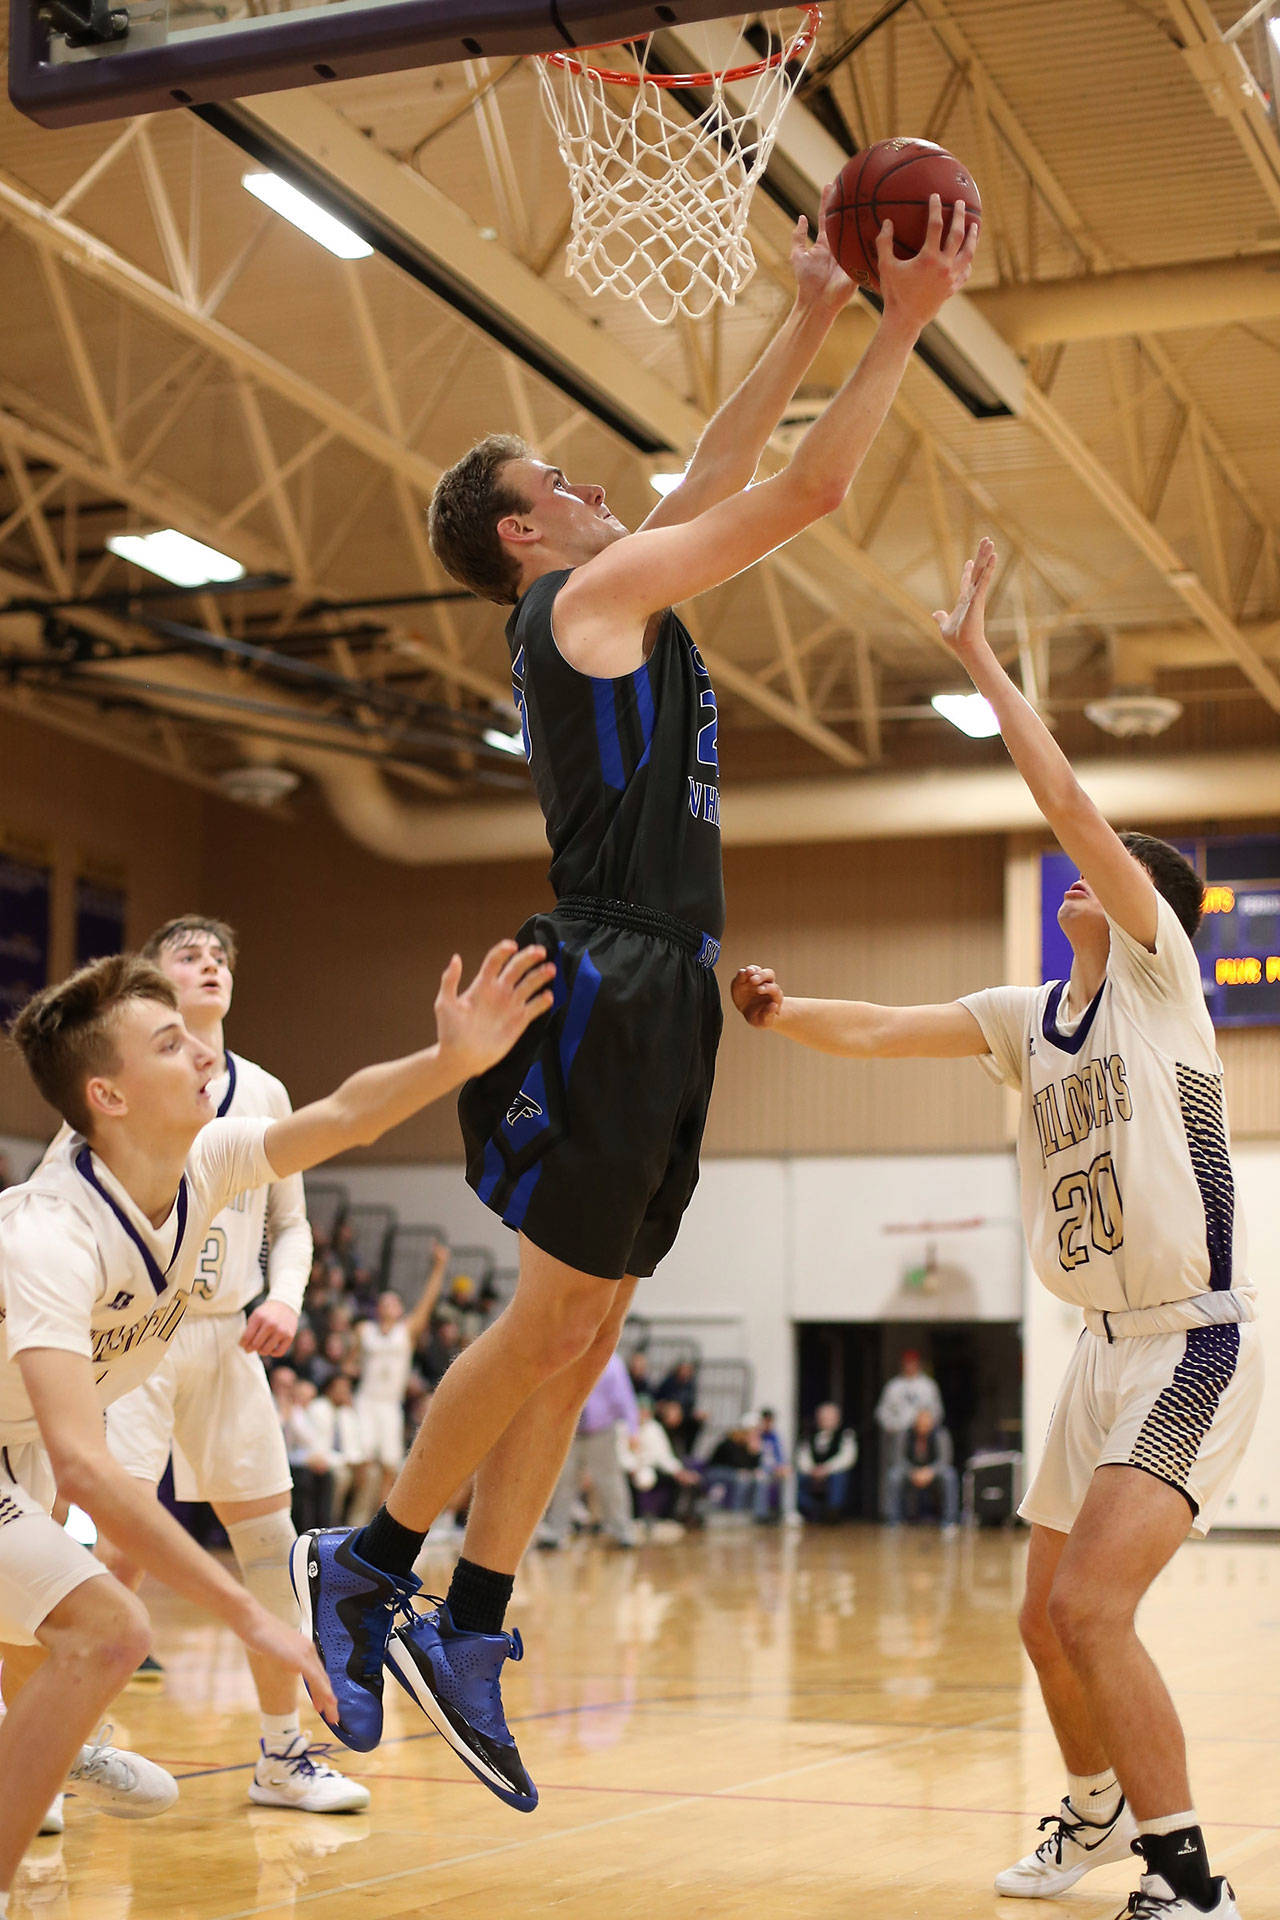 Levi Buck soars above three Wildcats to score for South Whidbey.(Photo by John Fisken)